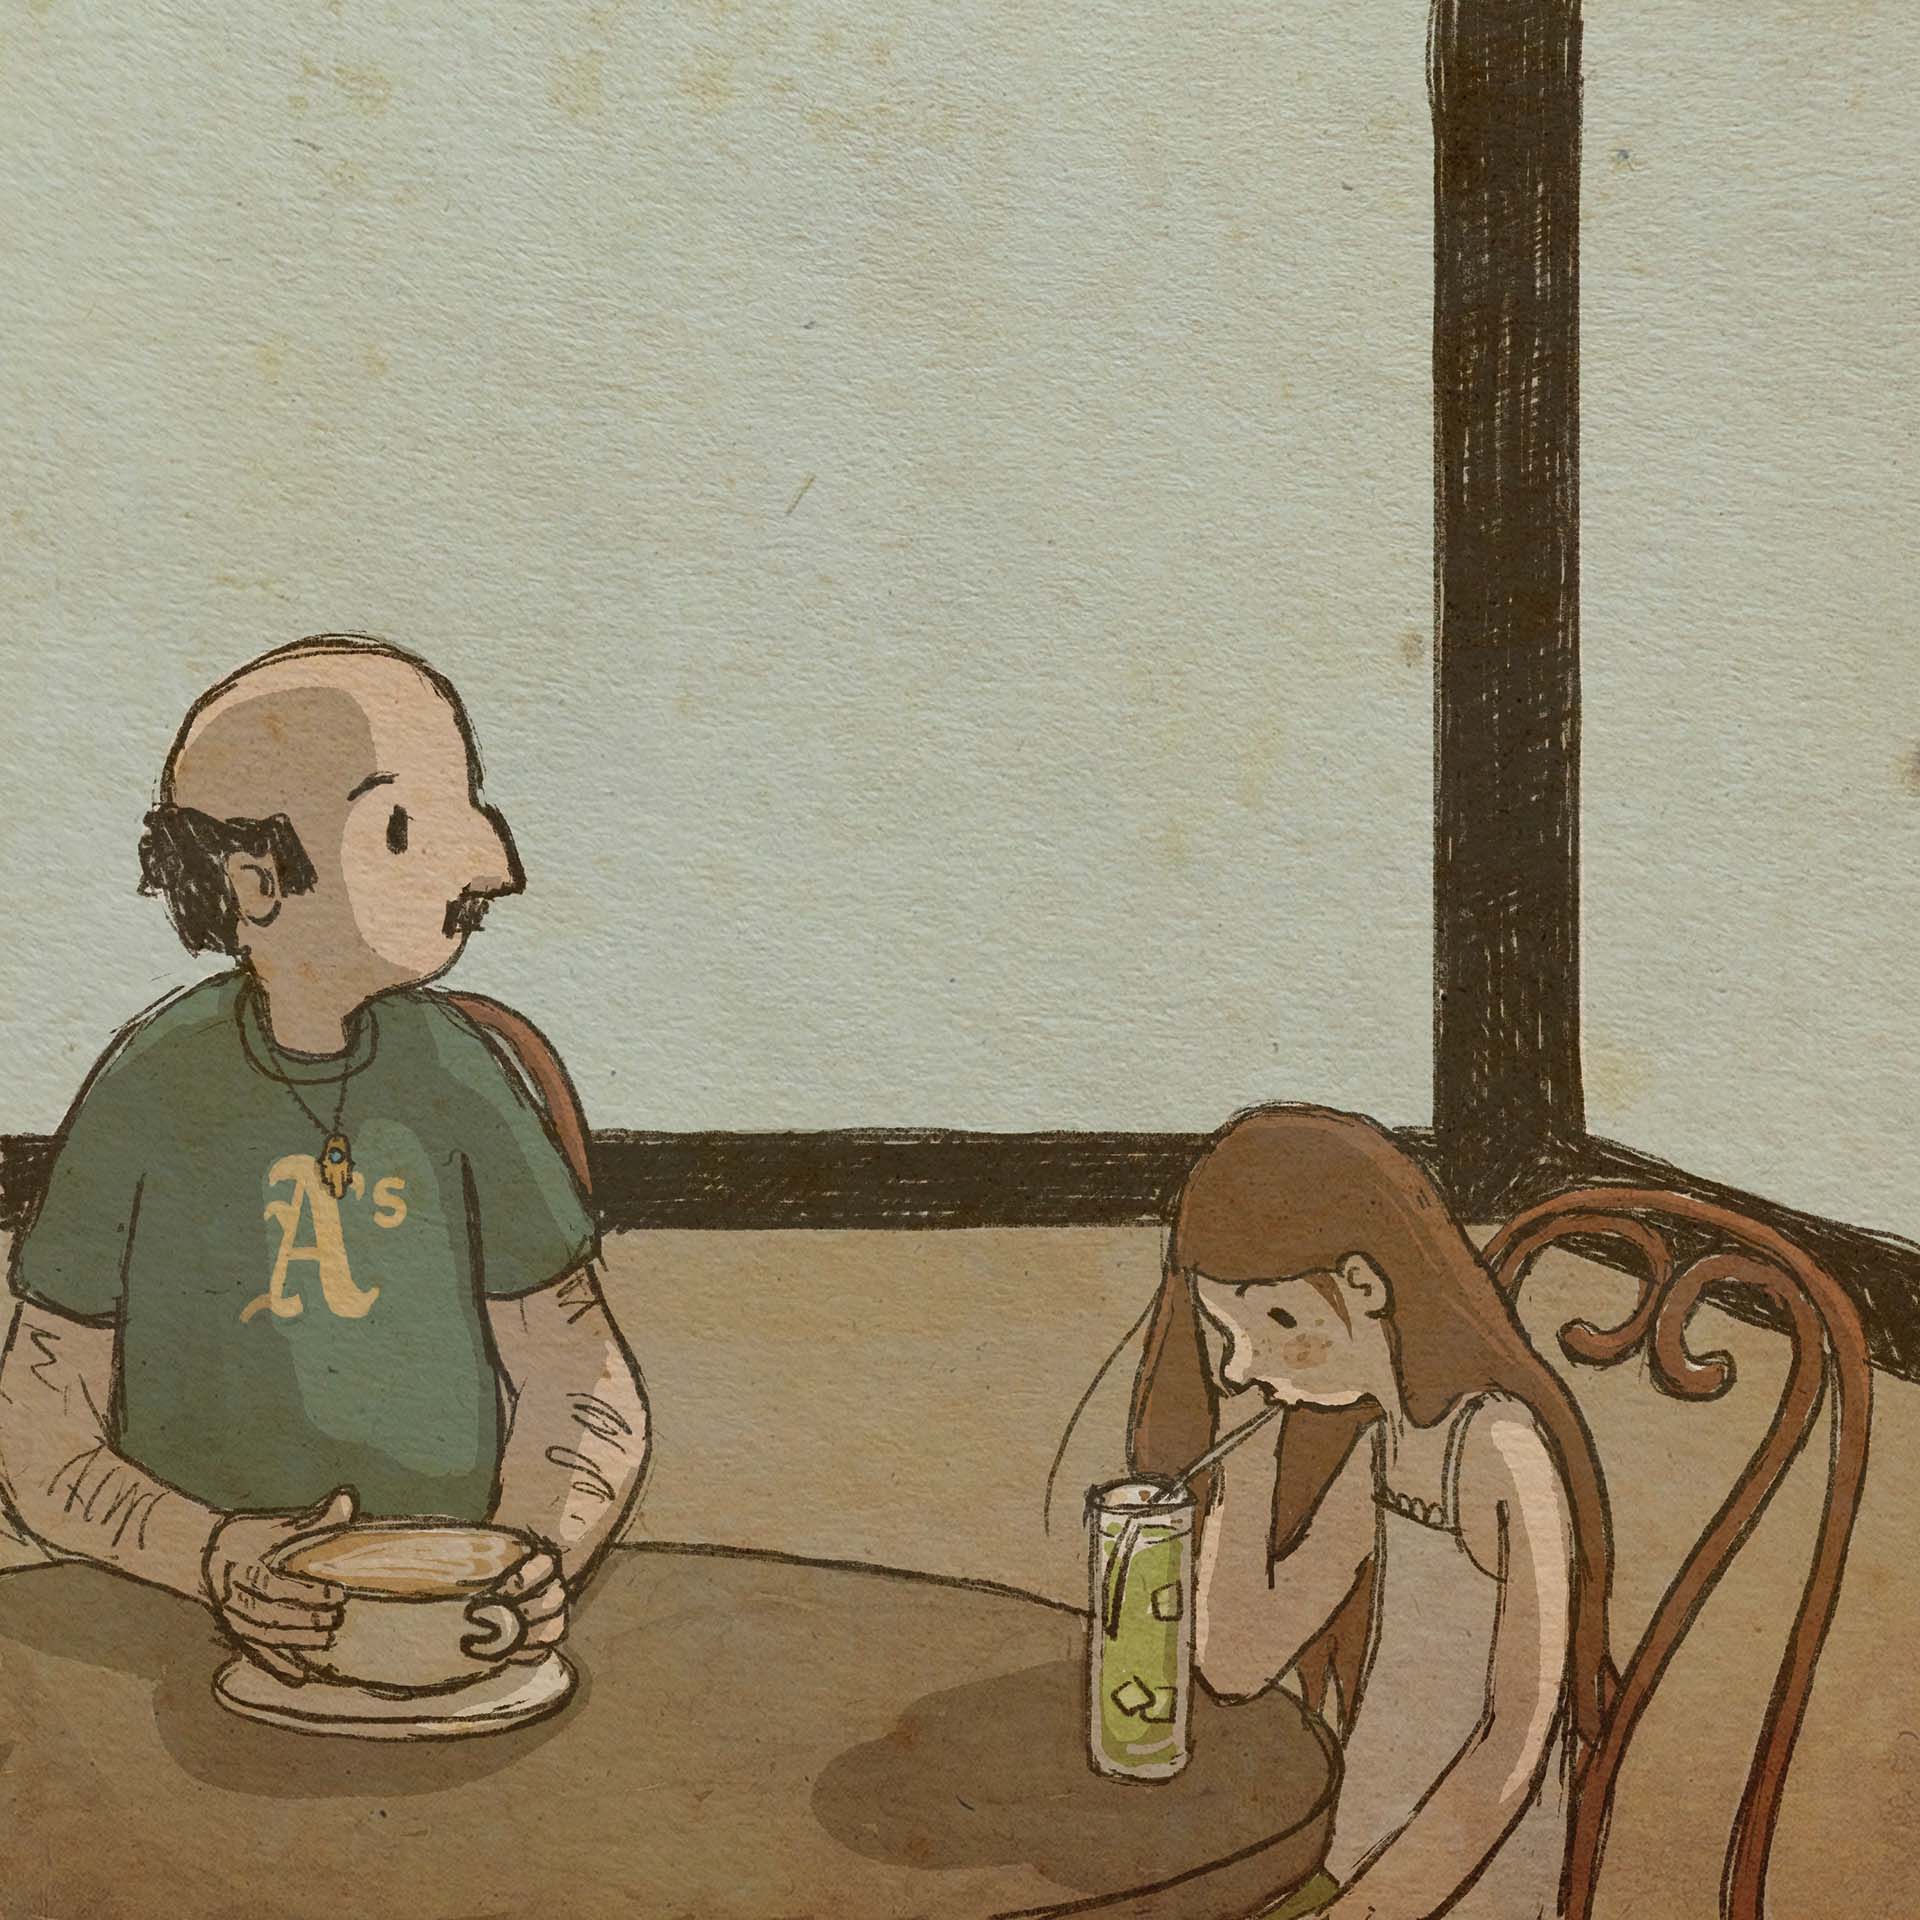 The father, wearing a green A's shirt, sits at a table in the cafe with his daughter, who looks down at her glass of soda.